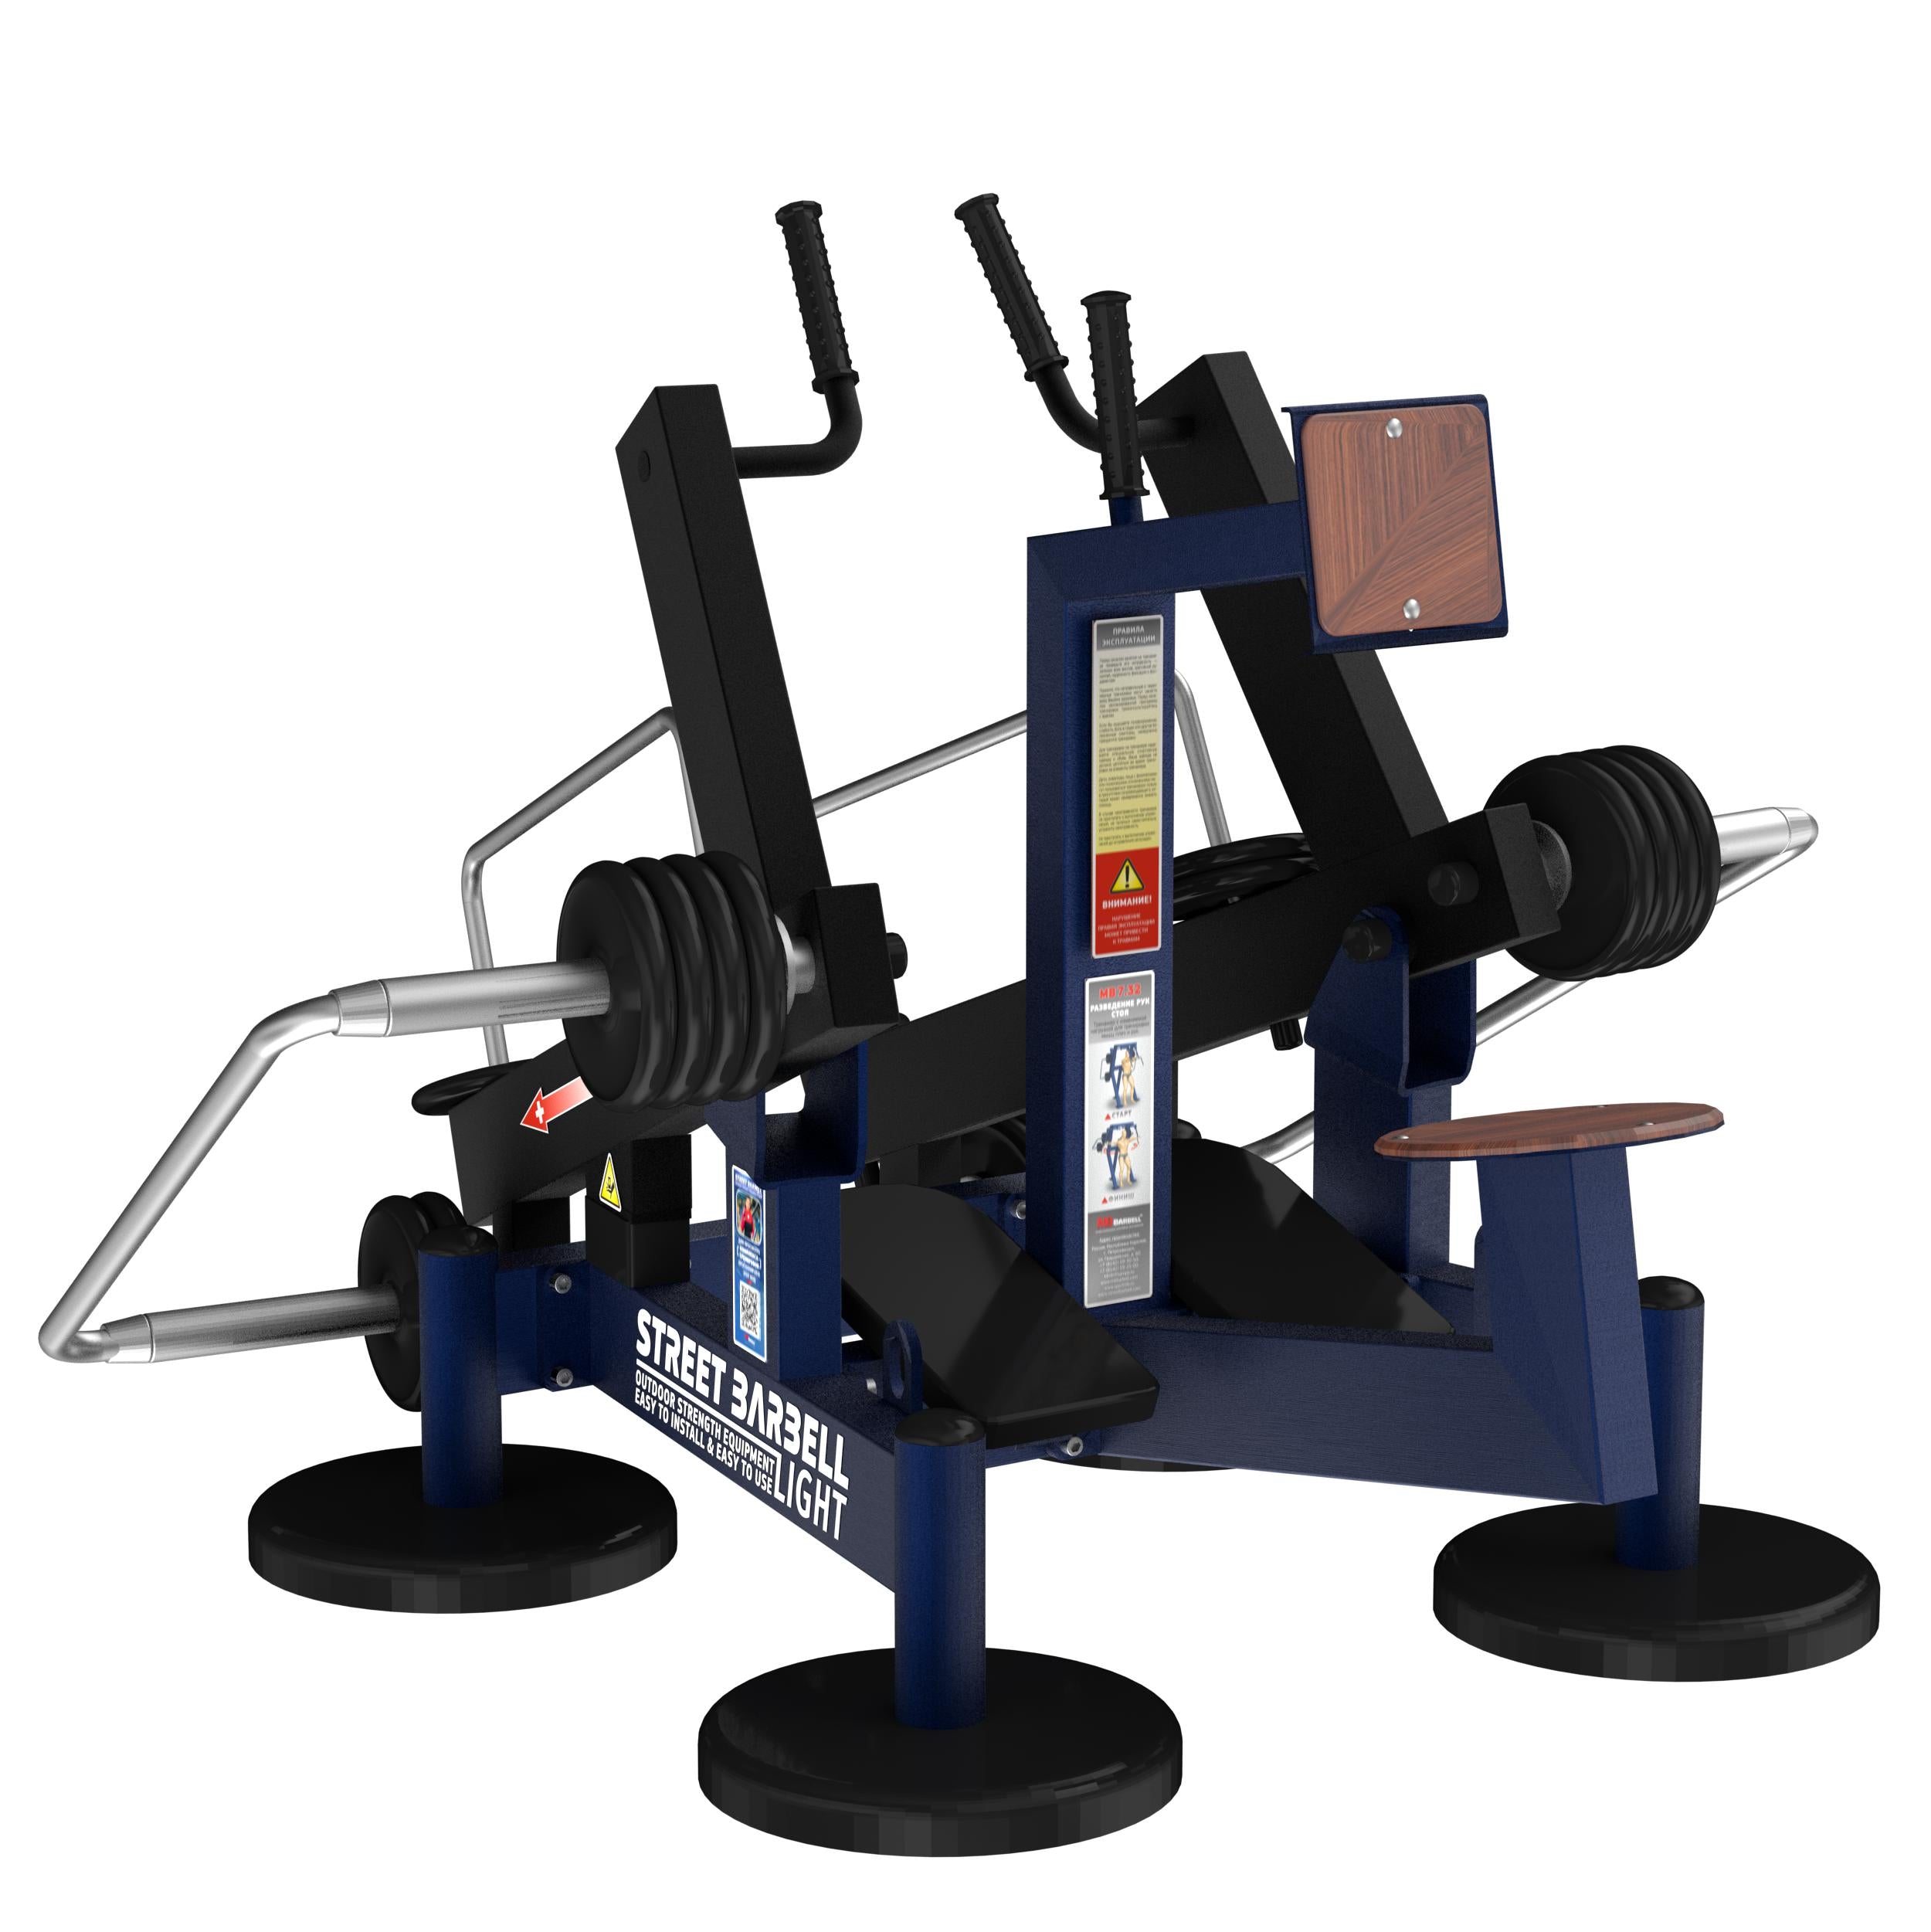 Street Barbell USA Seated Row (Outdoor Gym Equipment)